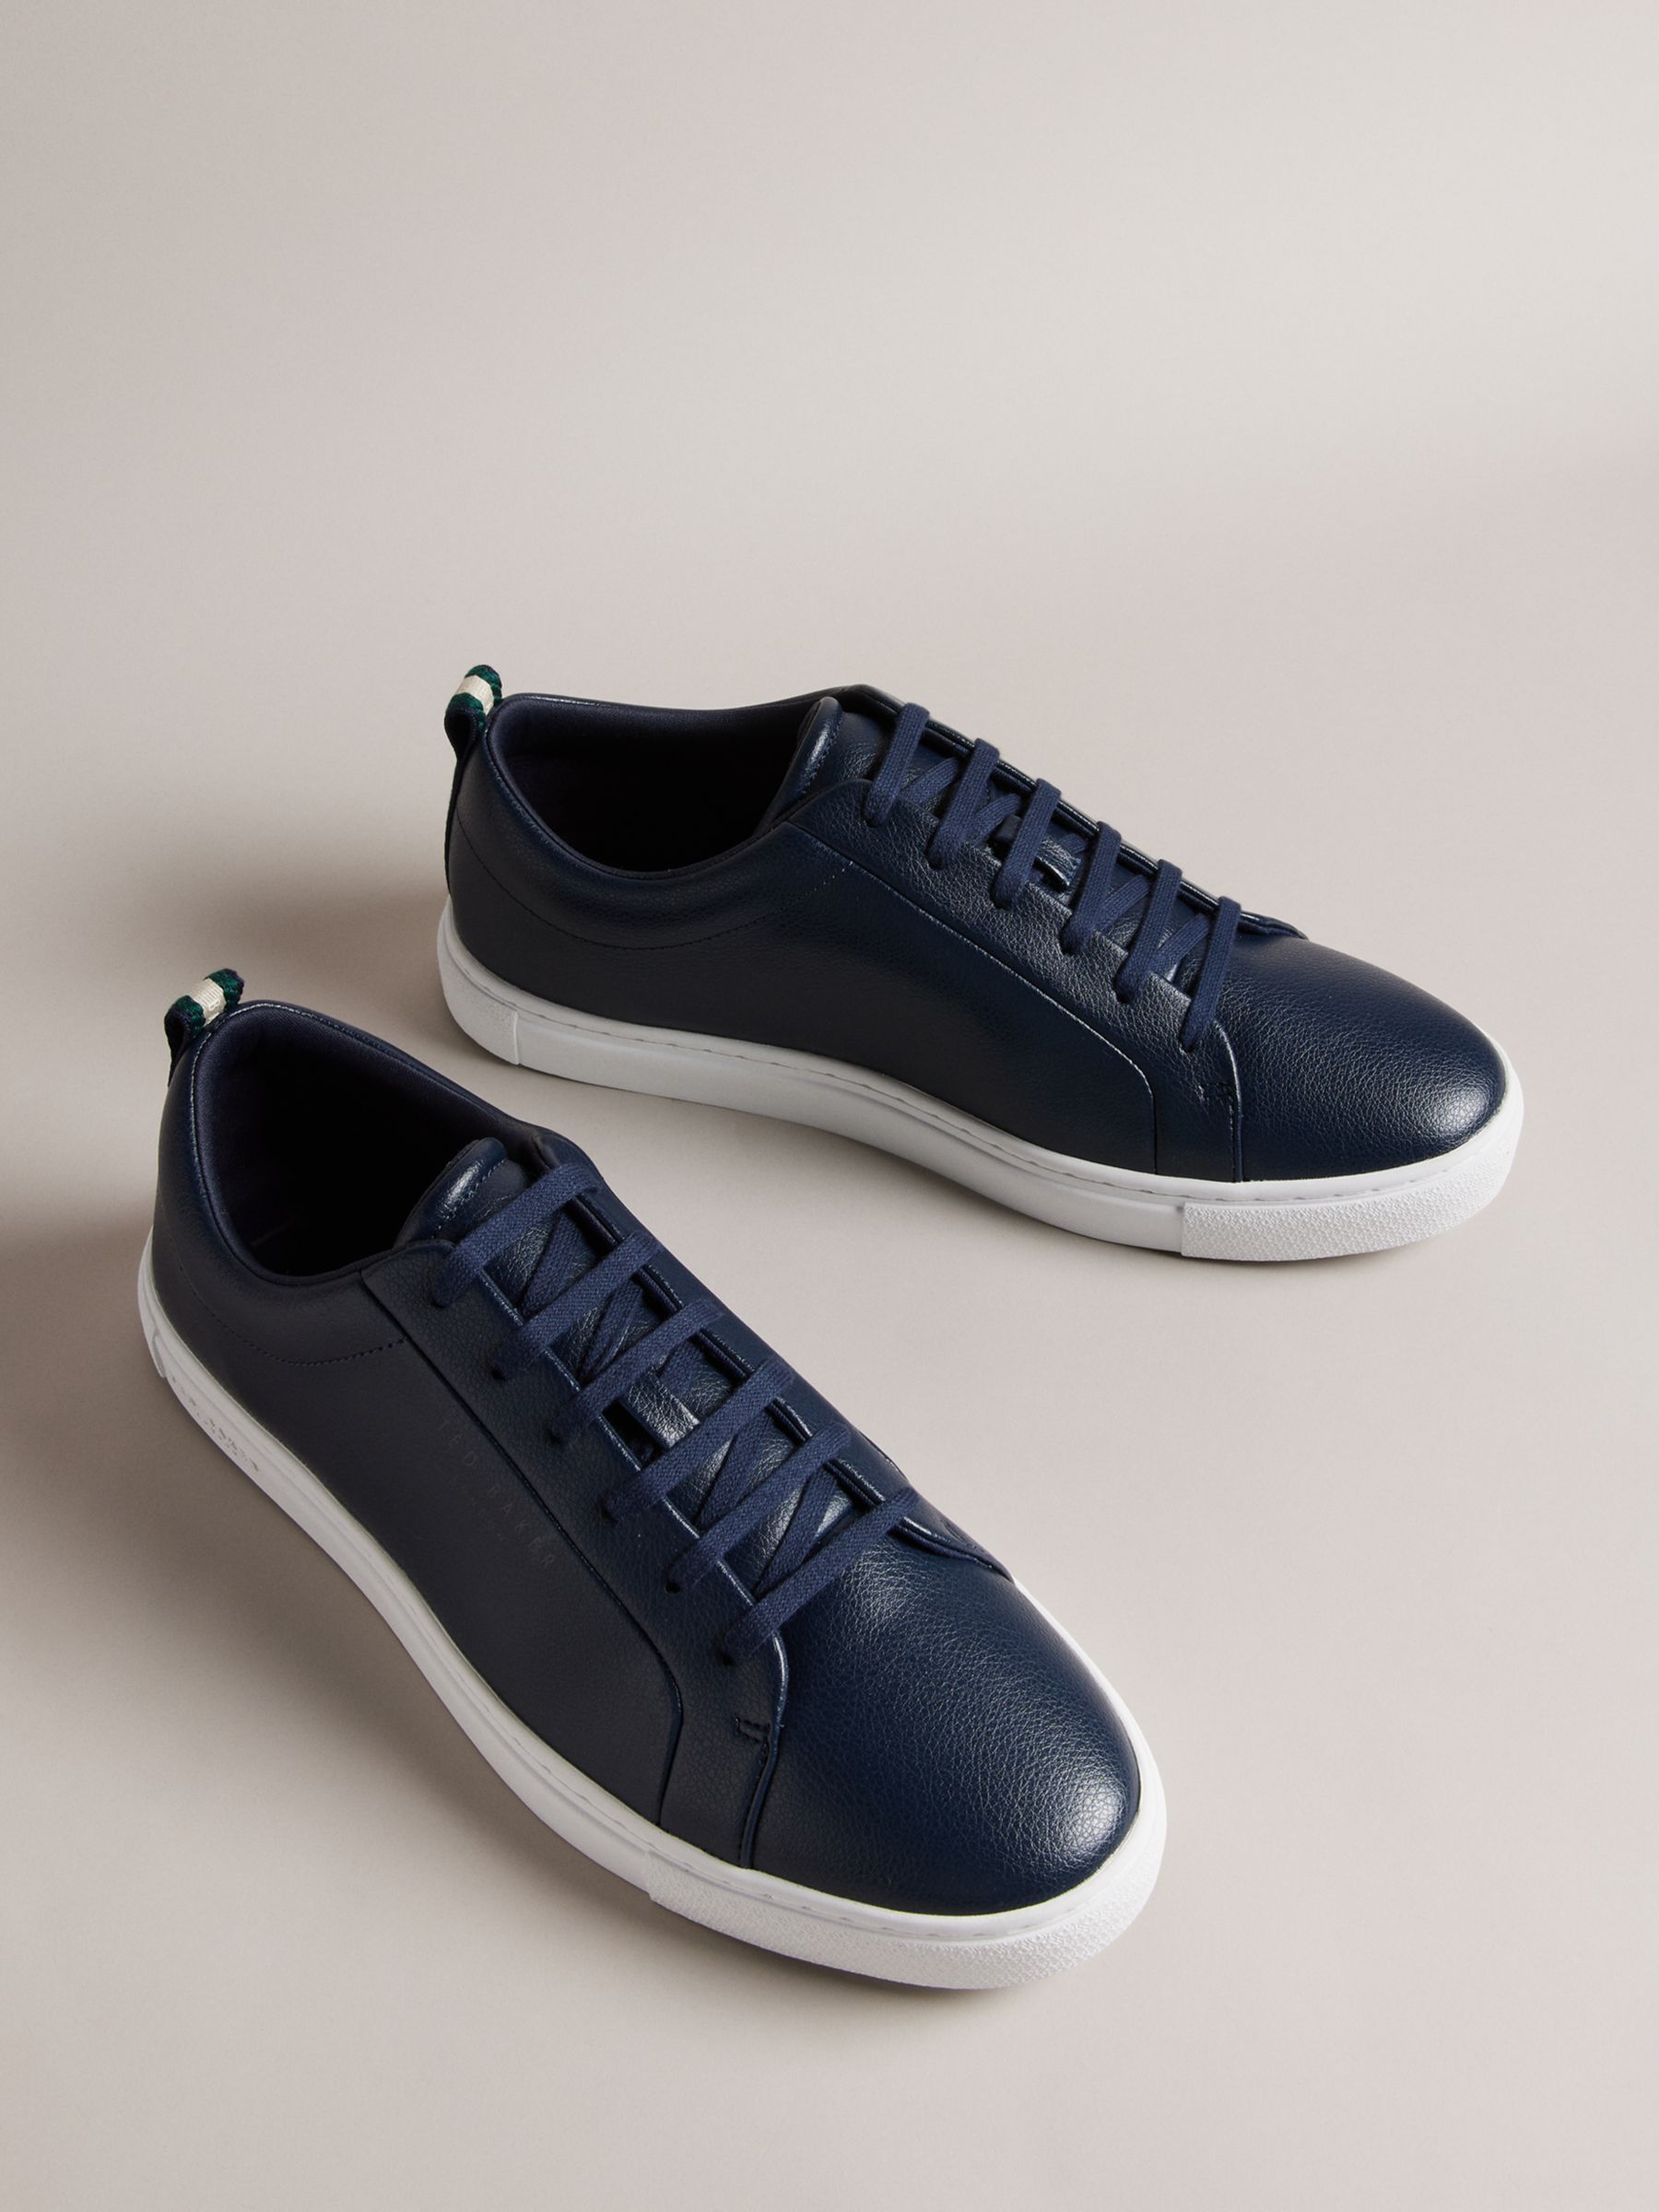 Ted Baker Artem Cupsole Lace Up Trainers, Blue Navy, EU44